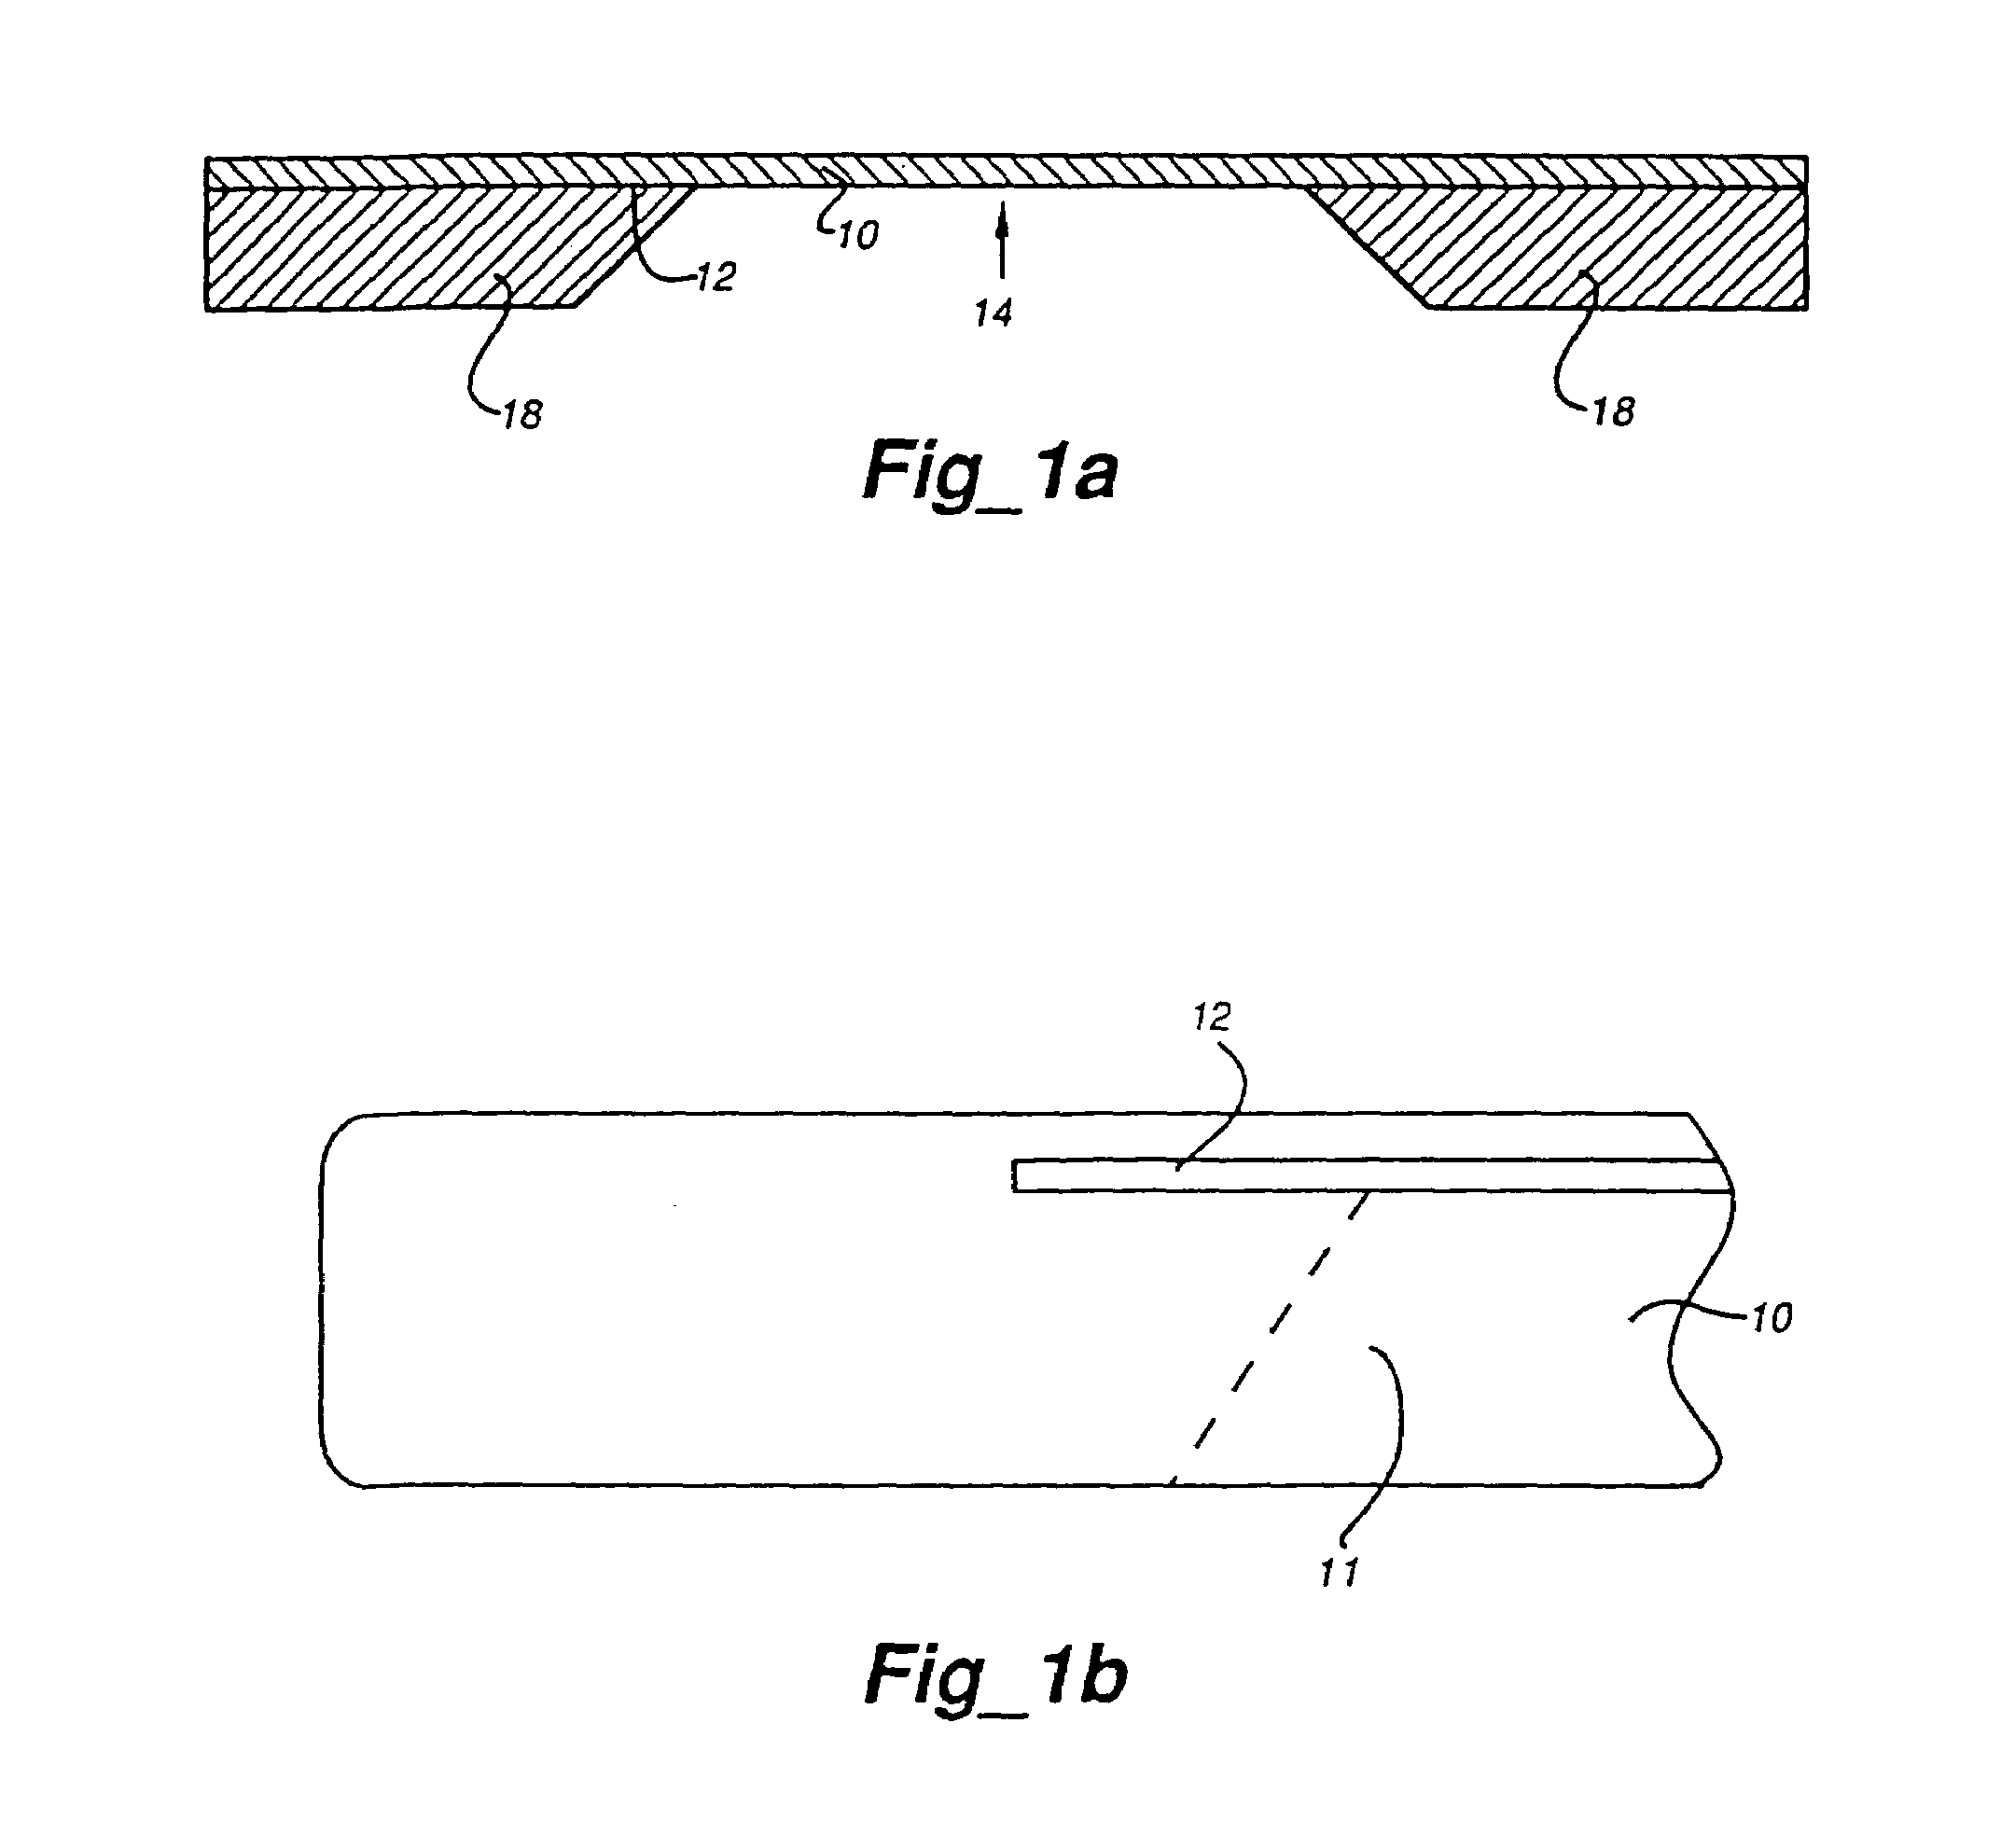 Methods for maskless lithography